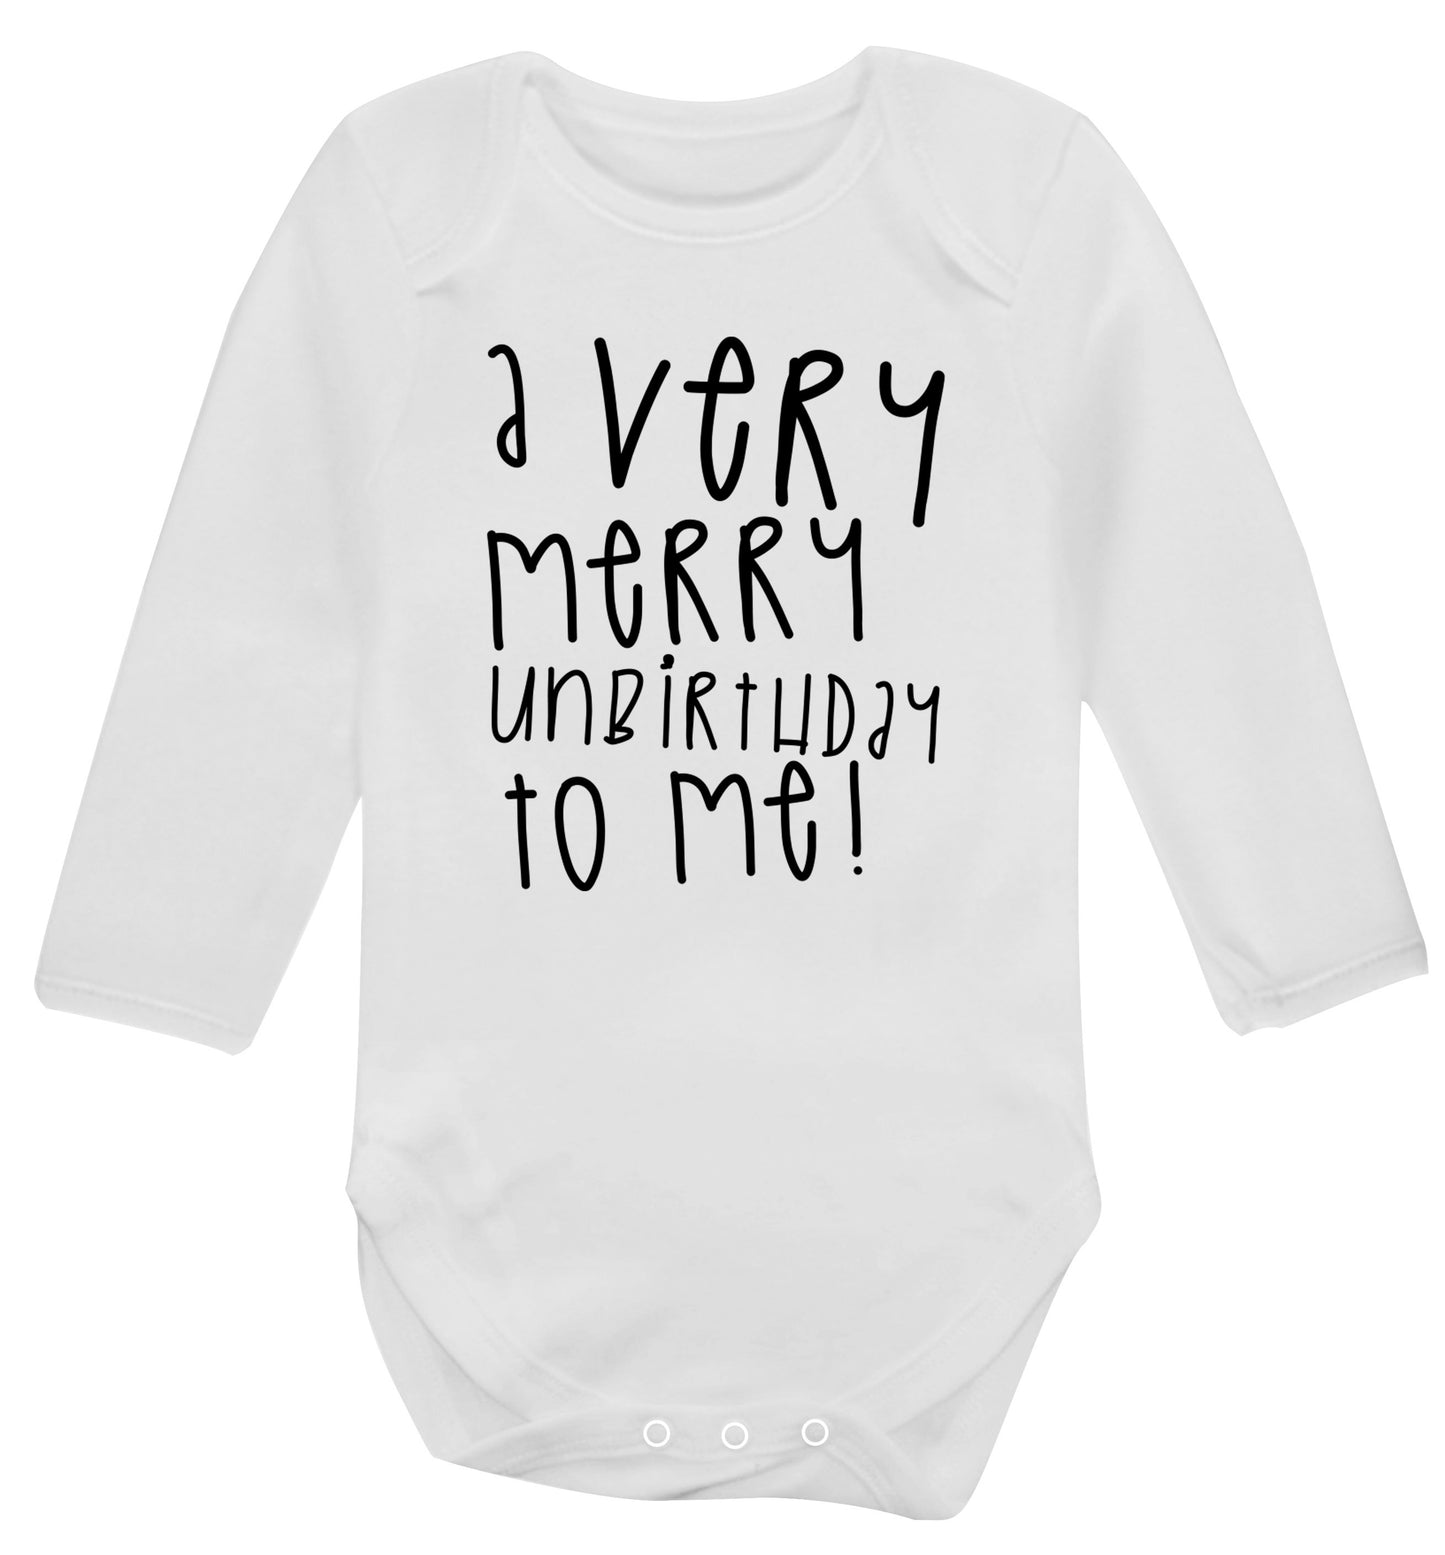 A very merry unbirthday to me! Baby Vest long sleeved white 6-12 months